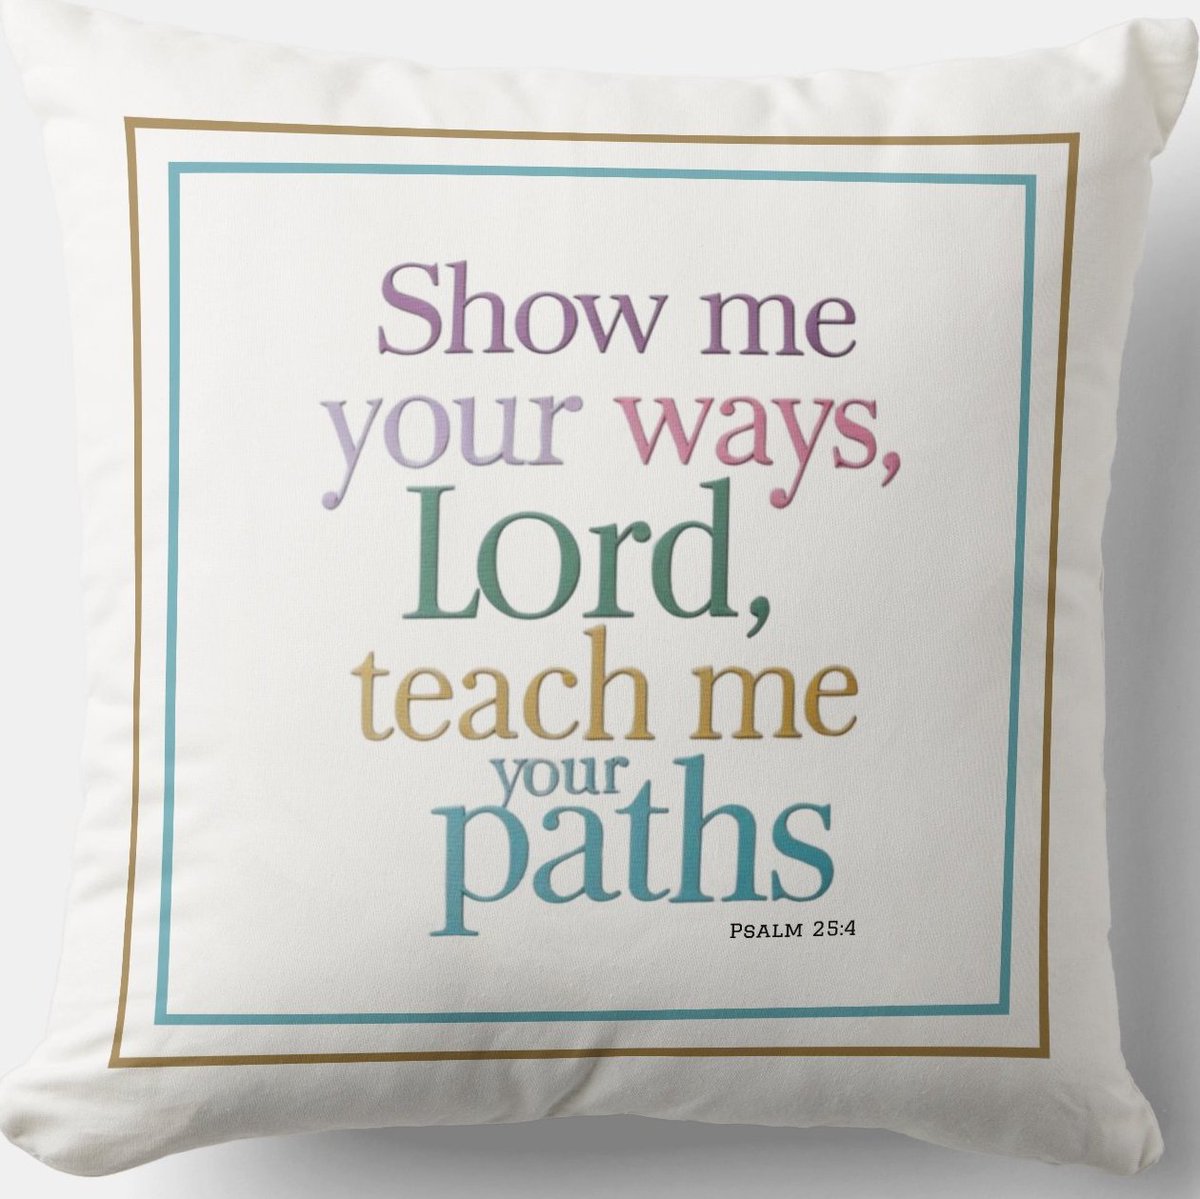 Show Me Your Ways Lord, Teach Your Paths zazzle.com/show_me_your_w… #Pillow #Blessing #JesusChrist #JesusSaves #Jesus #christian #spiritual #Homedecoration #uniquegift #giftideas #giftforhim  #giftidea #HolySpirit #pillows #giftshop #giftsforher #giftsforfriend #faith #hope #prayers